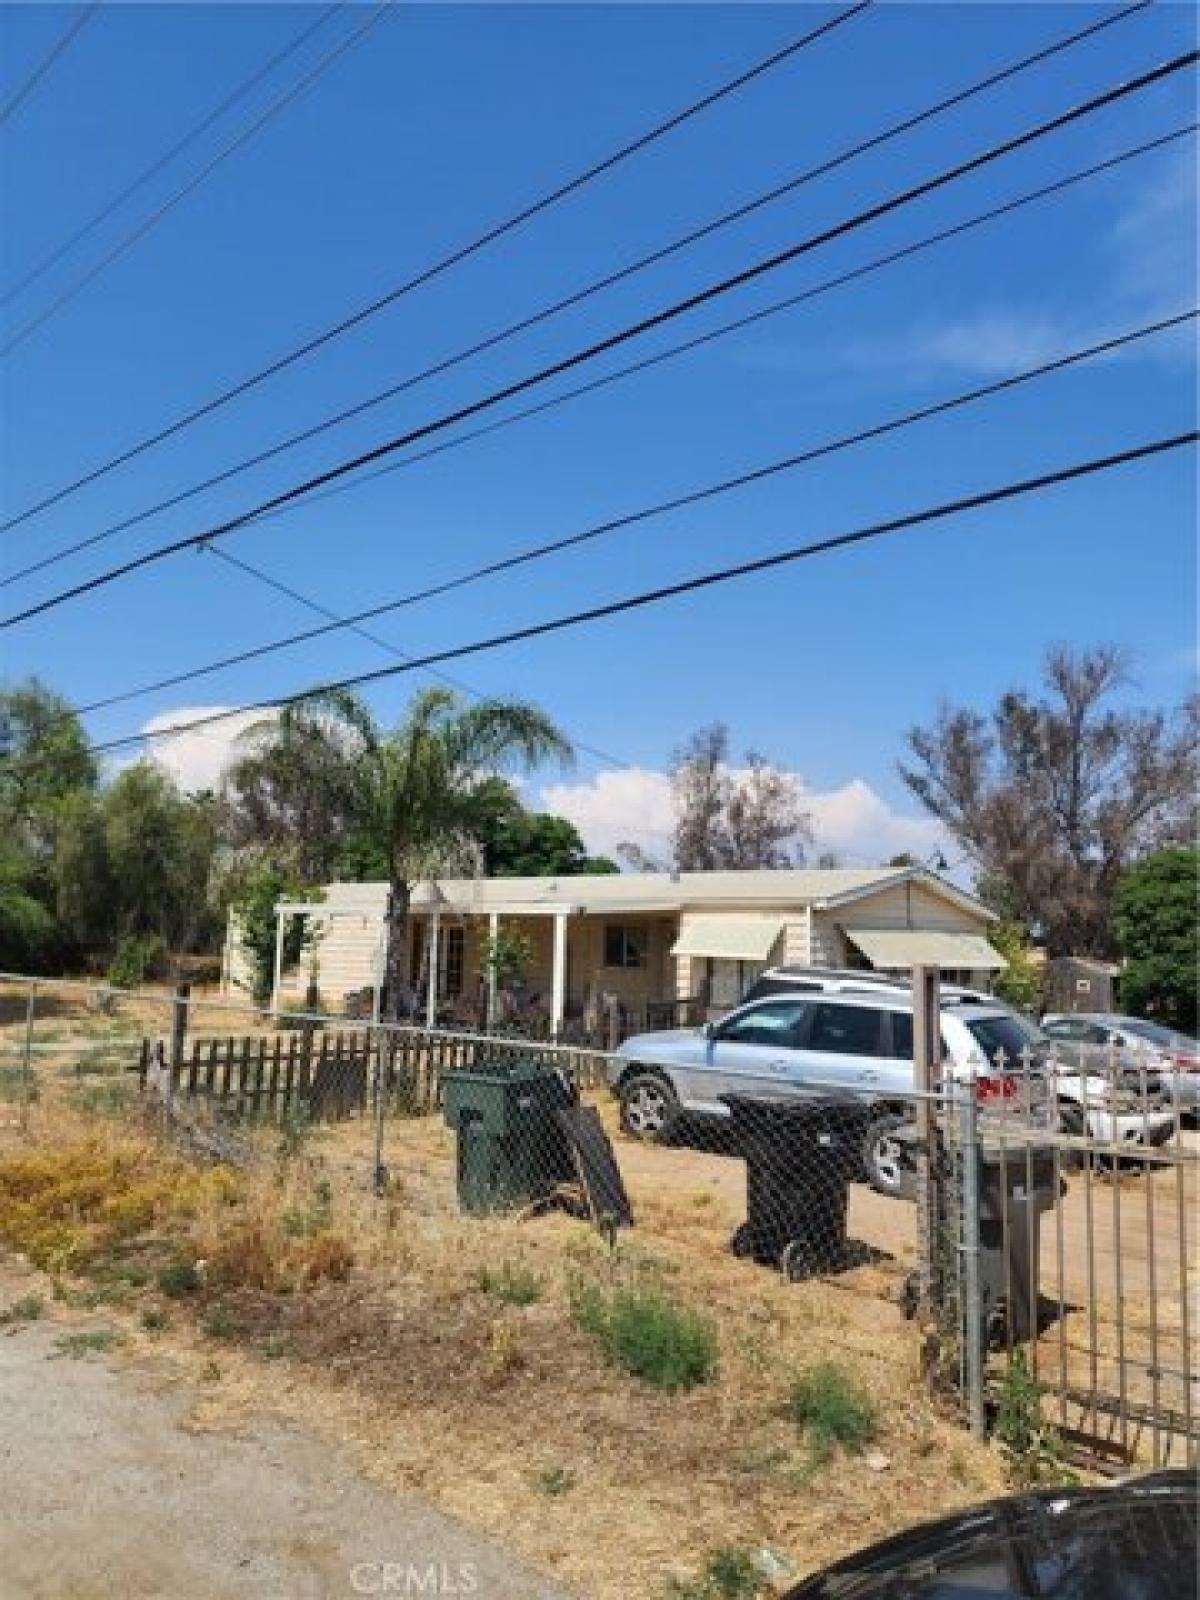 Picture of Home For Sale in Perris, California, United States